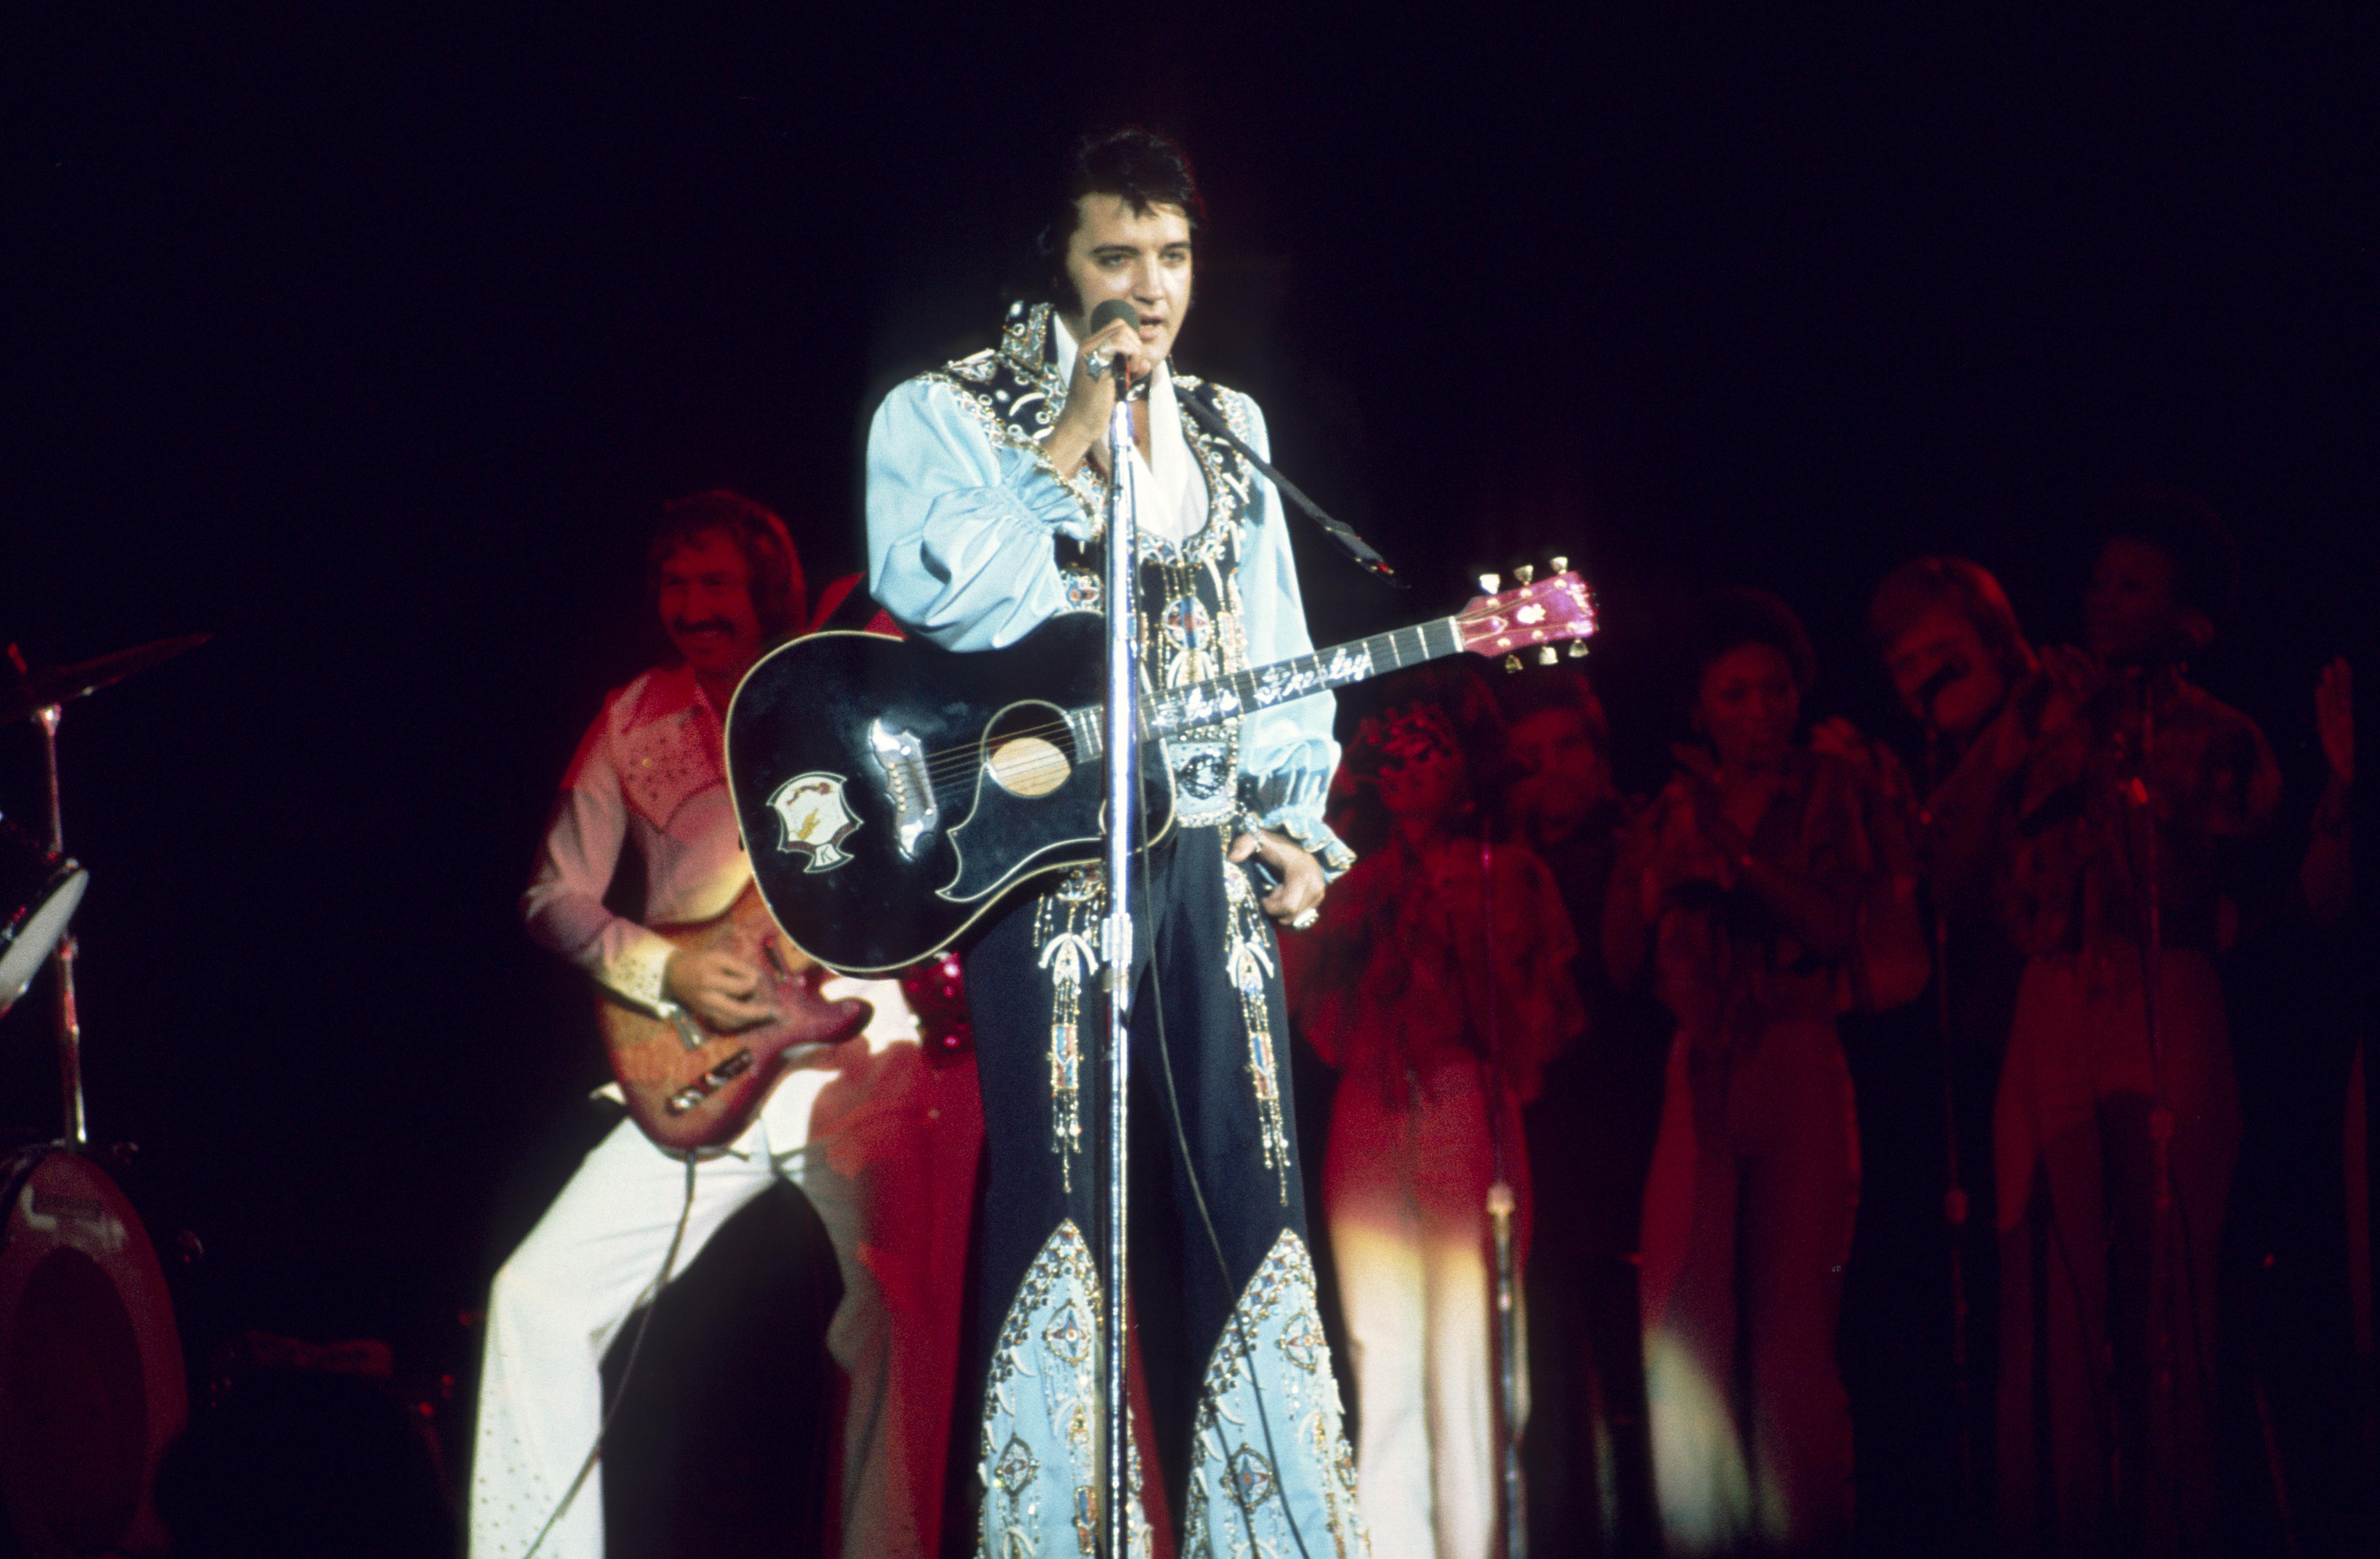 Elvis Presley performing on stage. He's singing into a stand microphone and holding a black guitar.